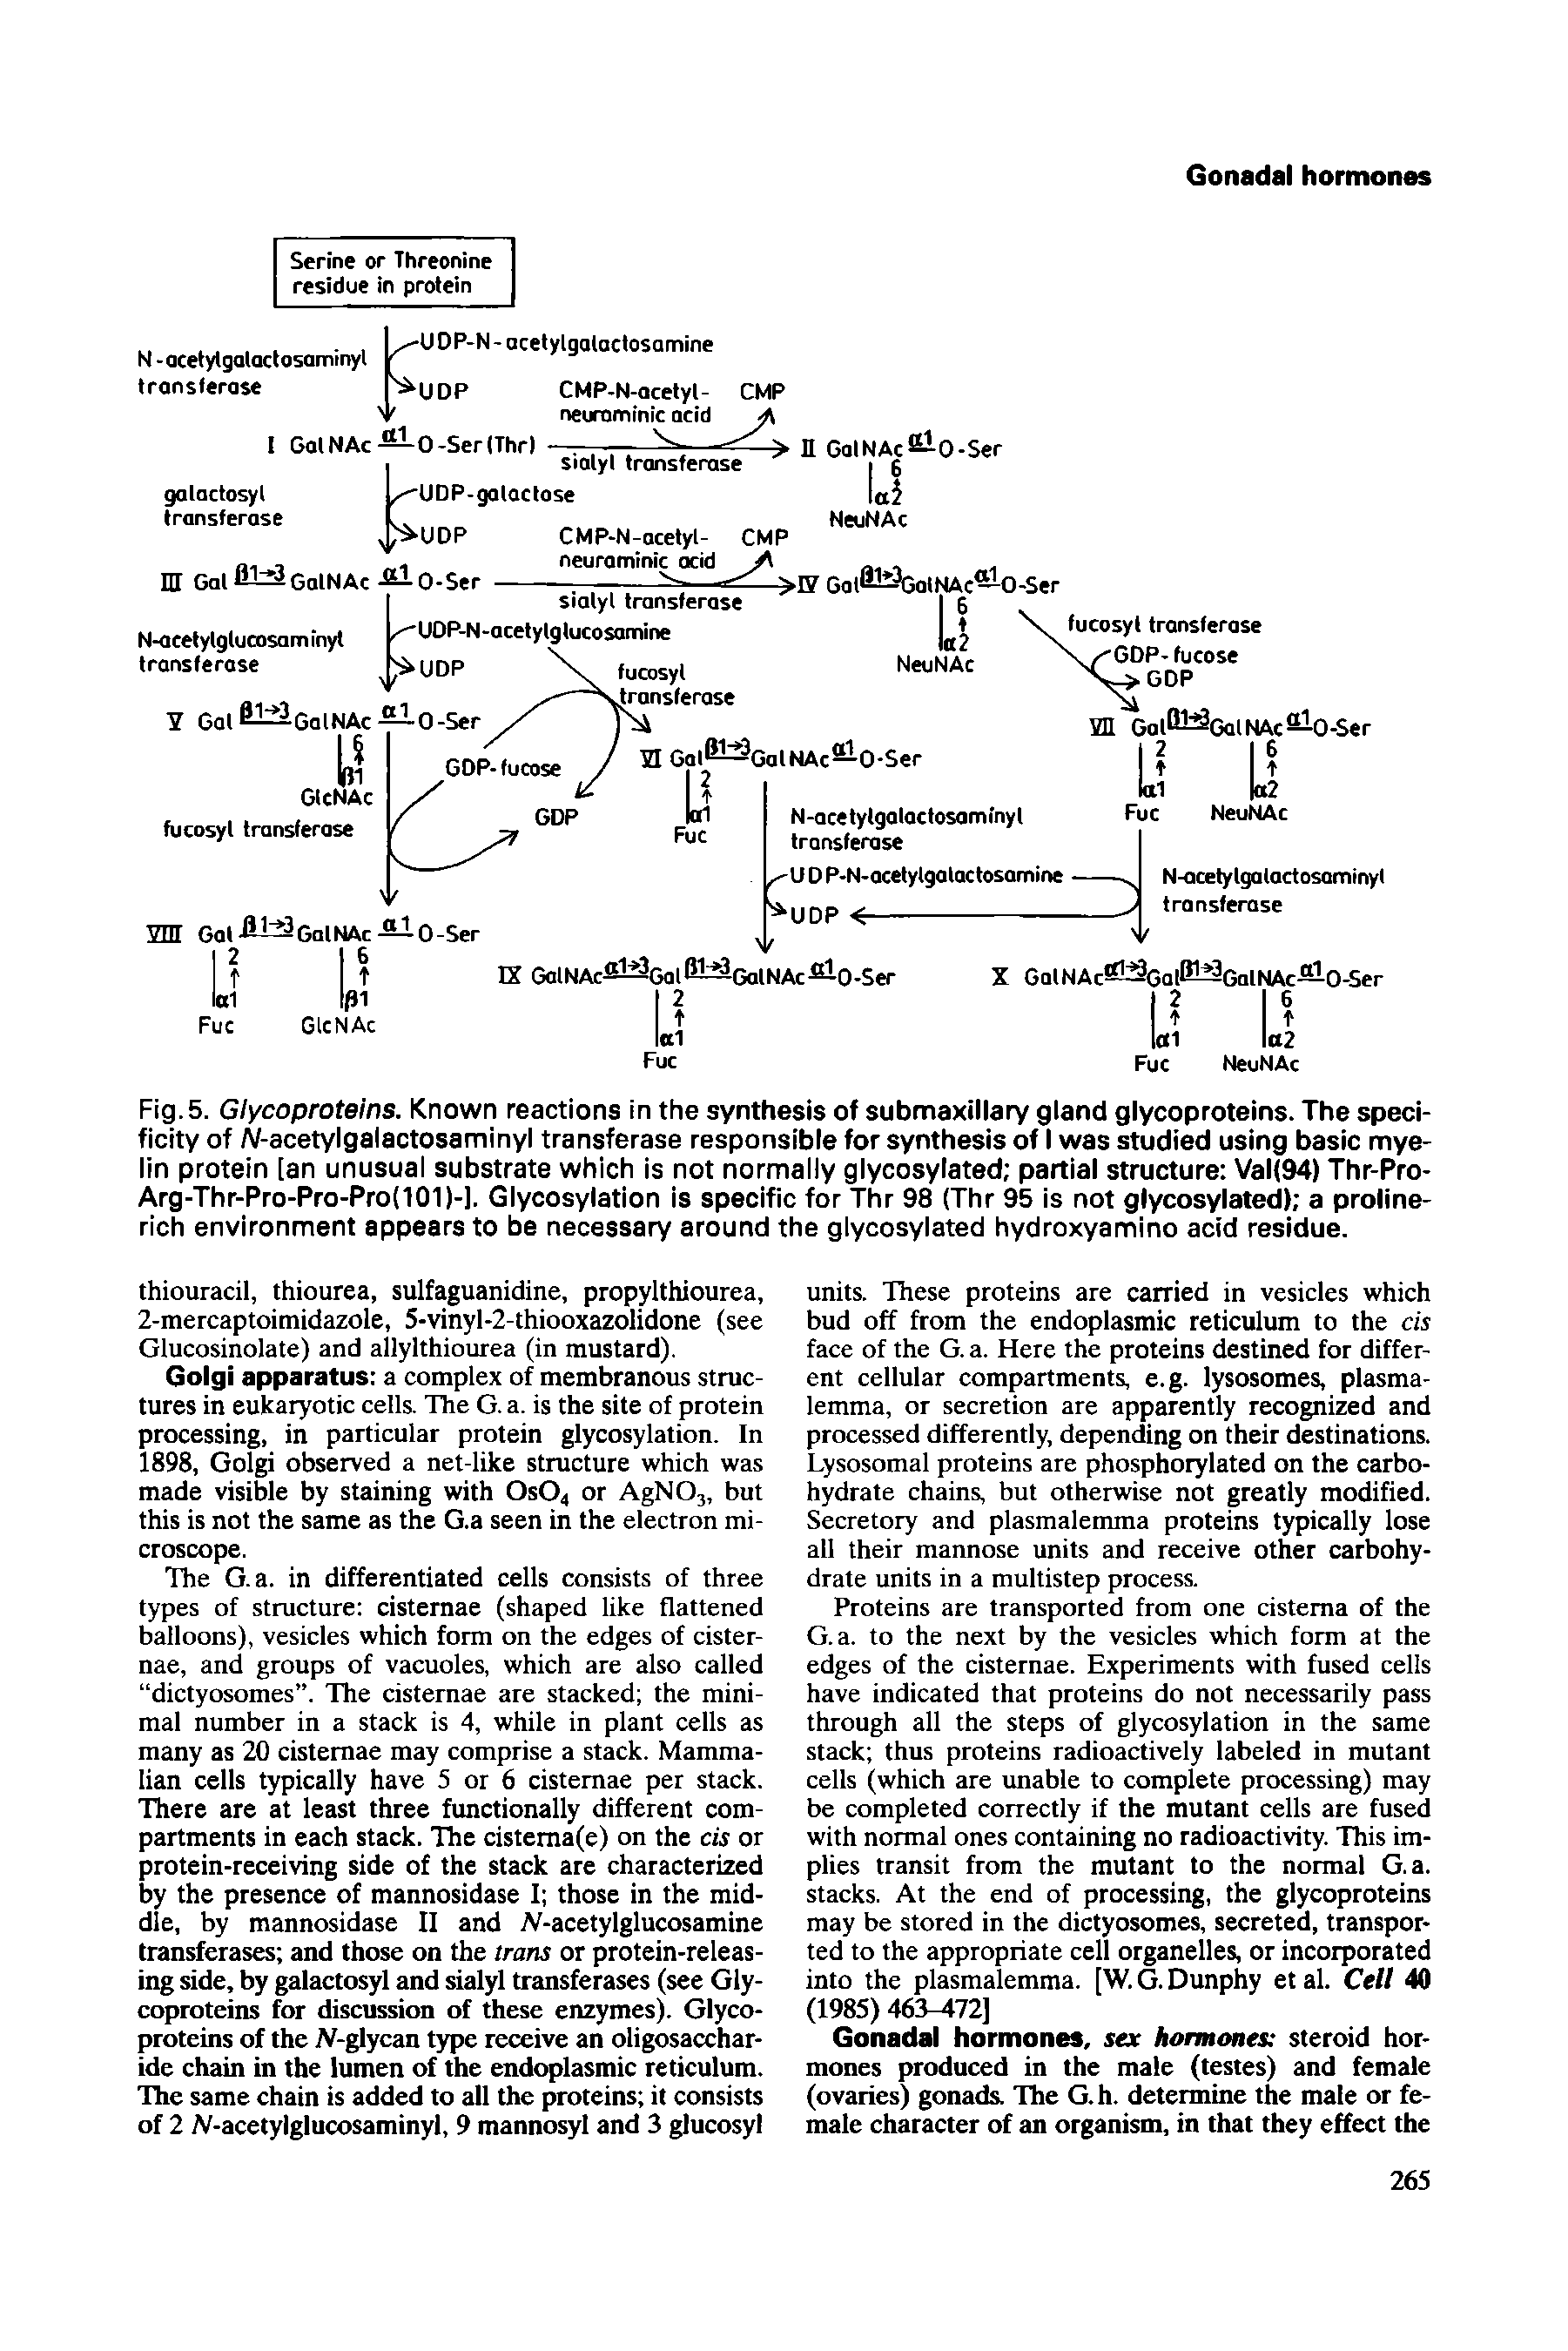 Fig. 5. Glycoproteins. Known reactions in the synthesis of submaxillary gland glycoproteins. The specificity of AZ-acetylgalactosaminyl transferase responsible for synthesis of I was studied using basic myelin protein [an unusual substrate which is not normally glycosylated partial structure Val(94) Thr-Pro-Arg-Thr-Pro-Pro-Pro(IOI)-]. Glyeosylation is specific for Thr 98 (Thr 95 is not glycosylated) a proline-rich environment appears to be necessary around the glycosylated hydroxyamino acid residue.